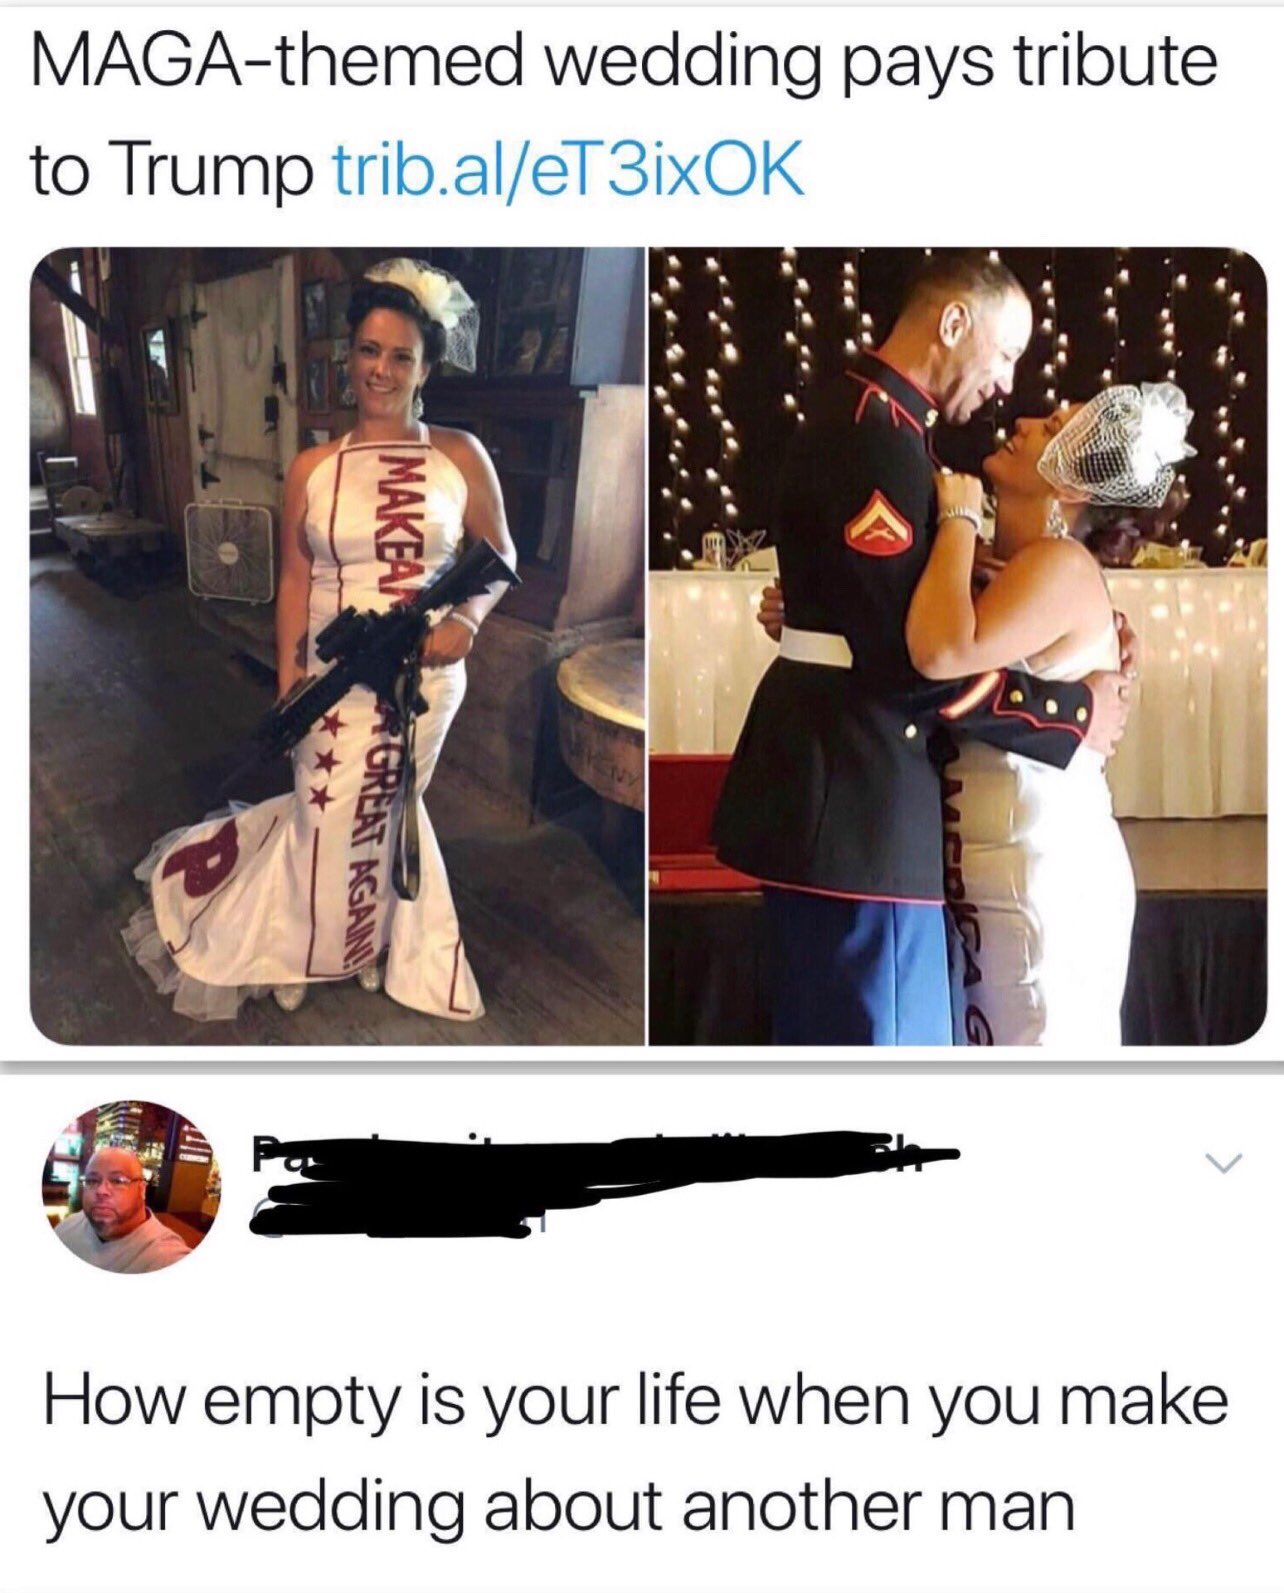 world class insults - shoulder - Magathemed wedding pays tribute to Trump trib.aleT3ixOK Makea Great Again! How empty is your life when you make your wedding about another man